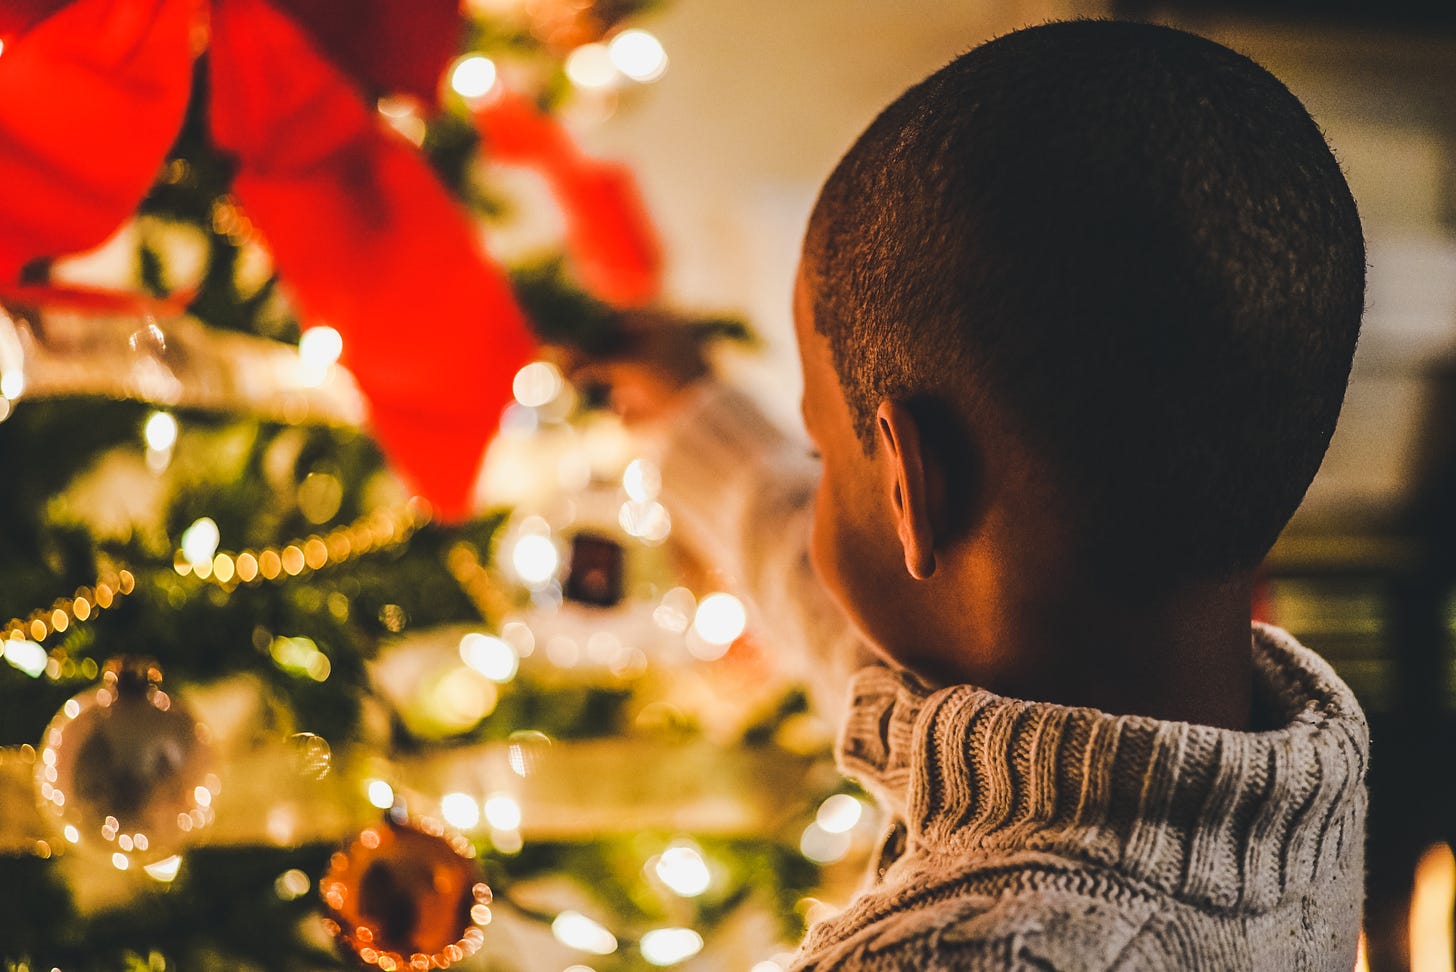 A little boy with his back to the camera looks at a Christmas tree (Photo by Chris Benson on Unsplash)